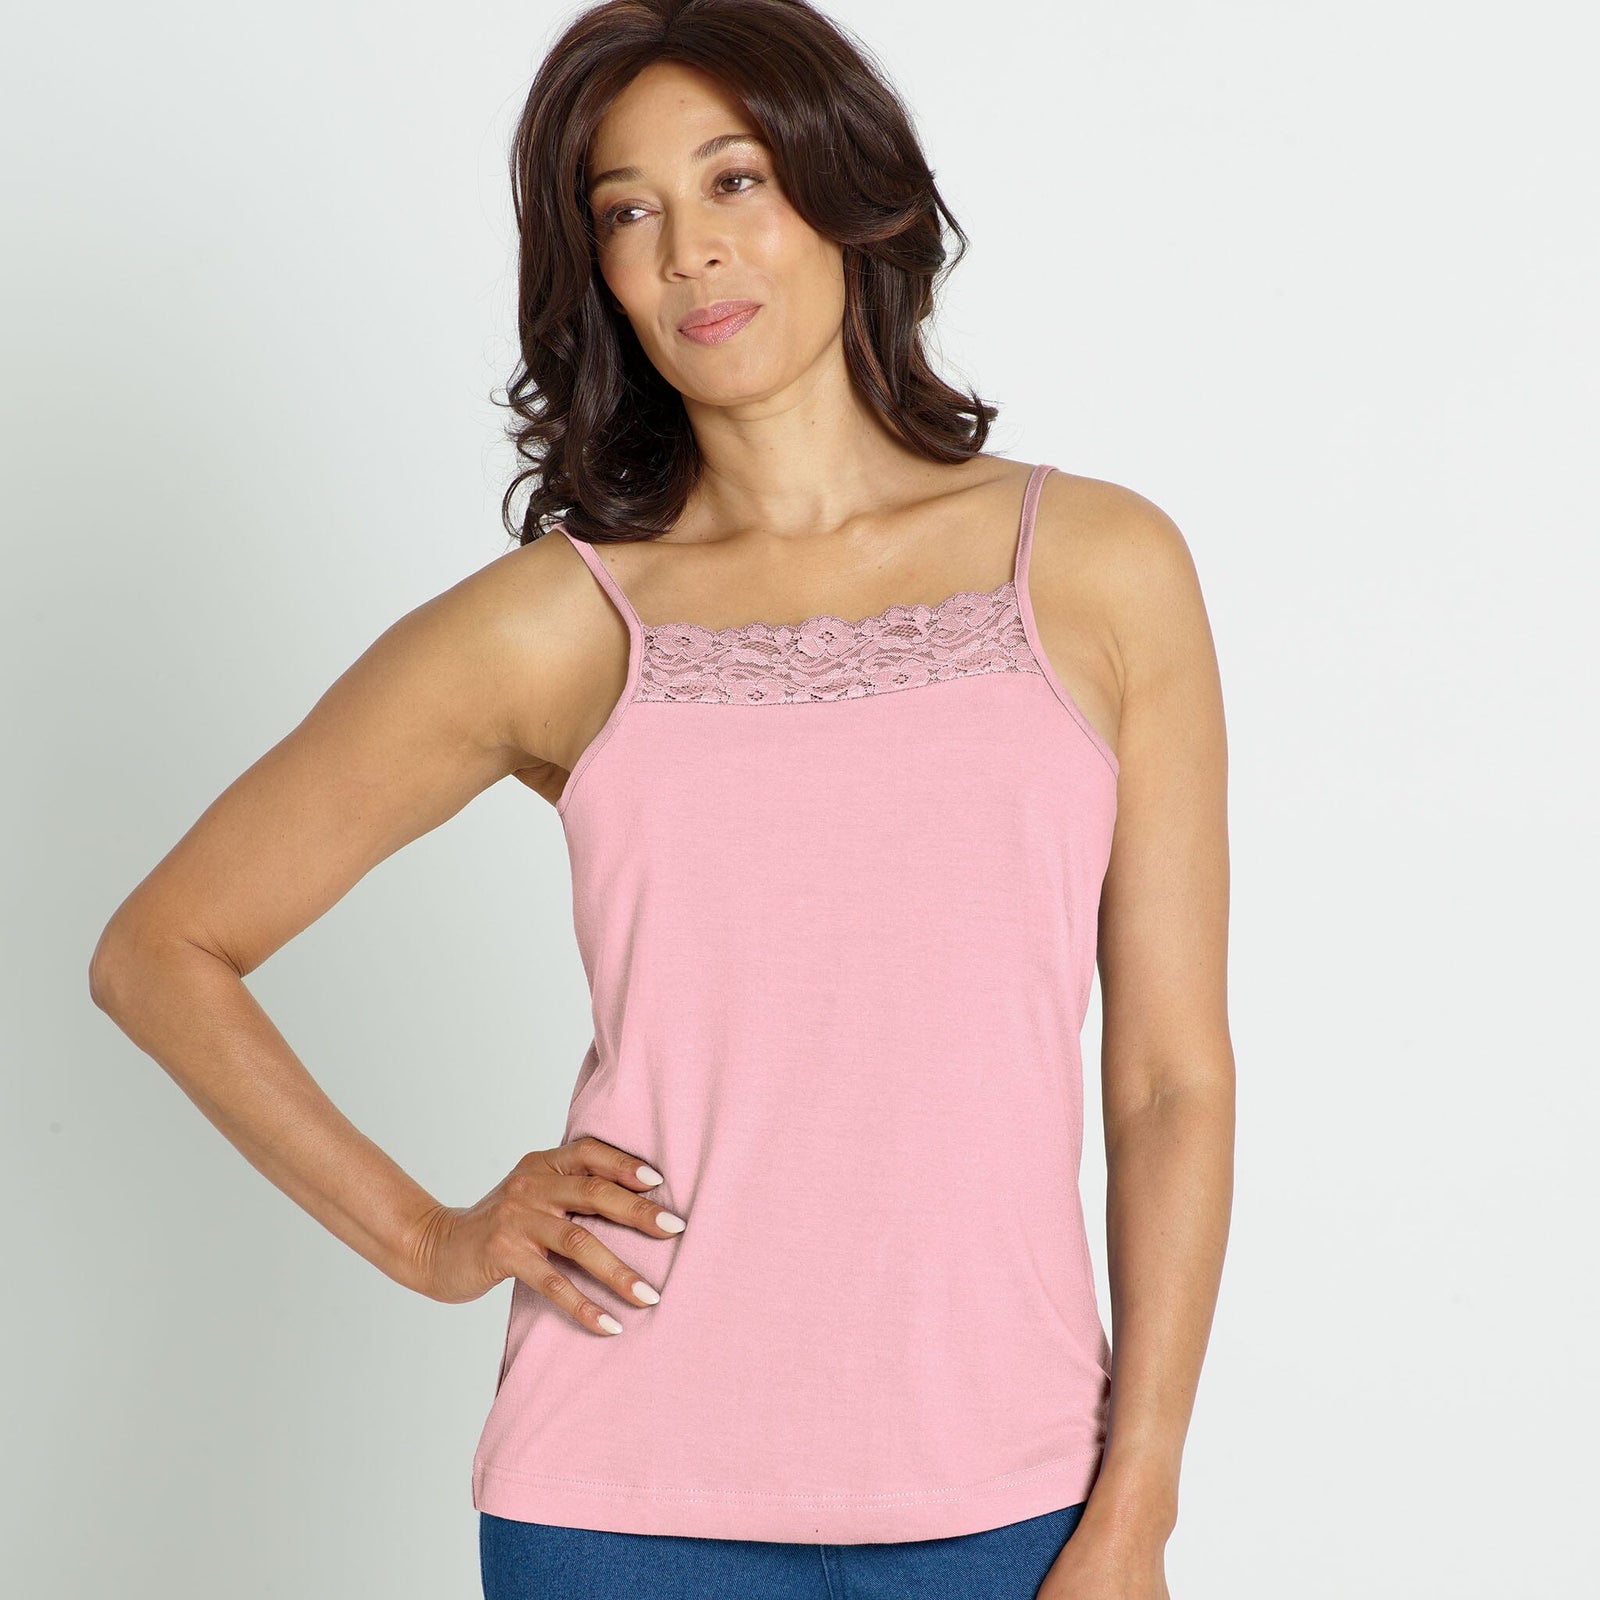 Cut-Out Mastectomy Camisole Tank Top with Built-in Prosthetics - NO Br -  CureDiva